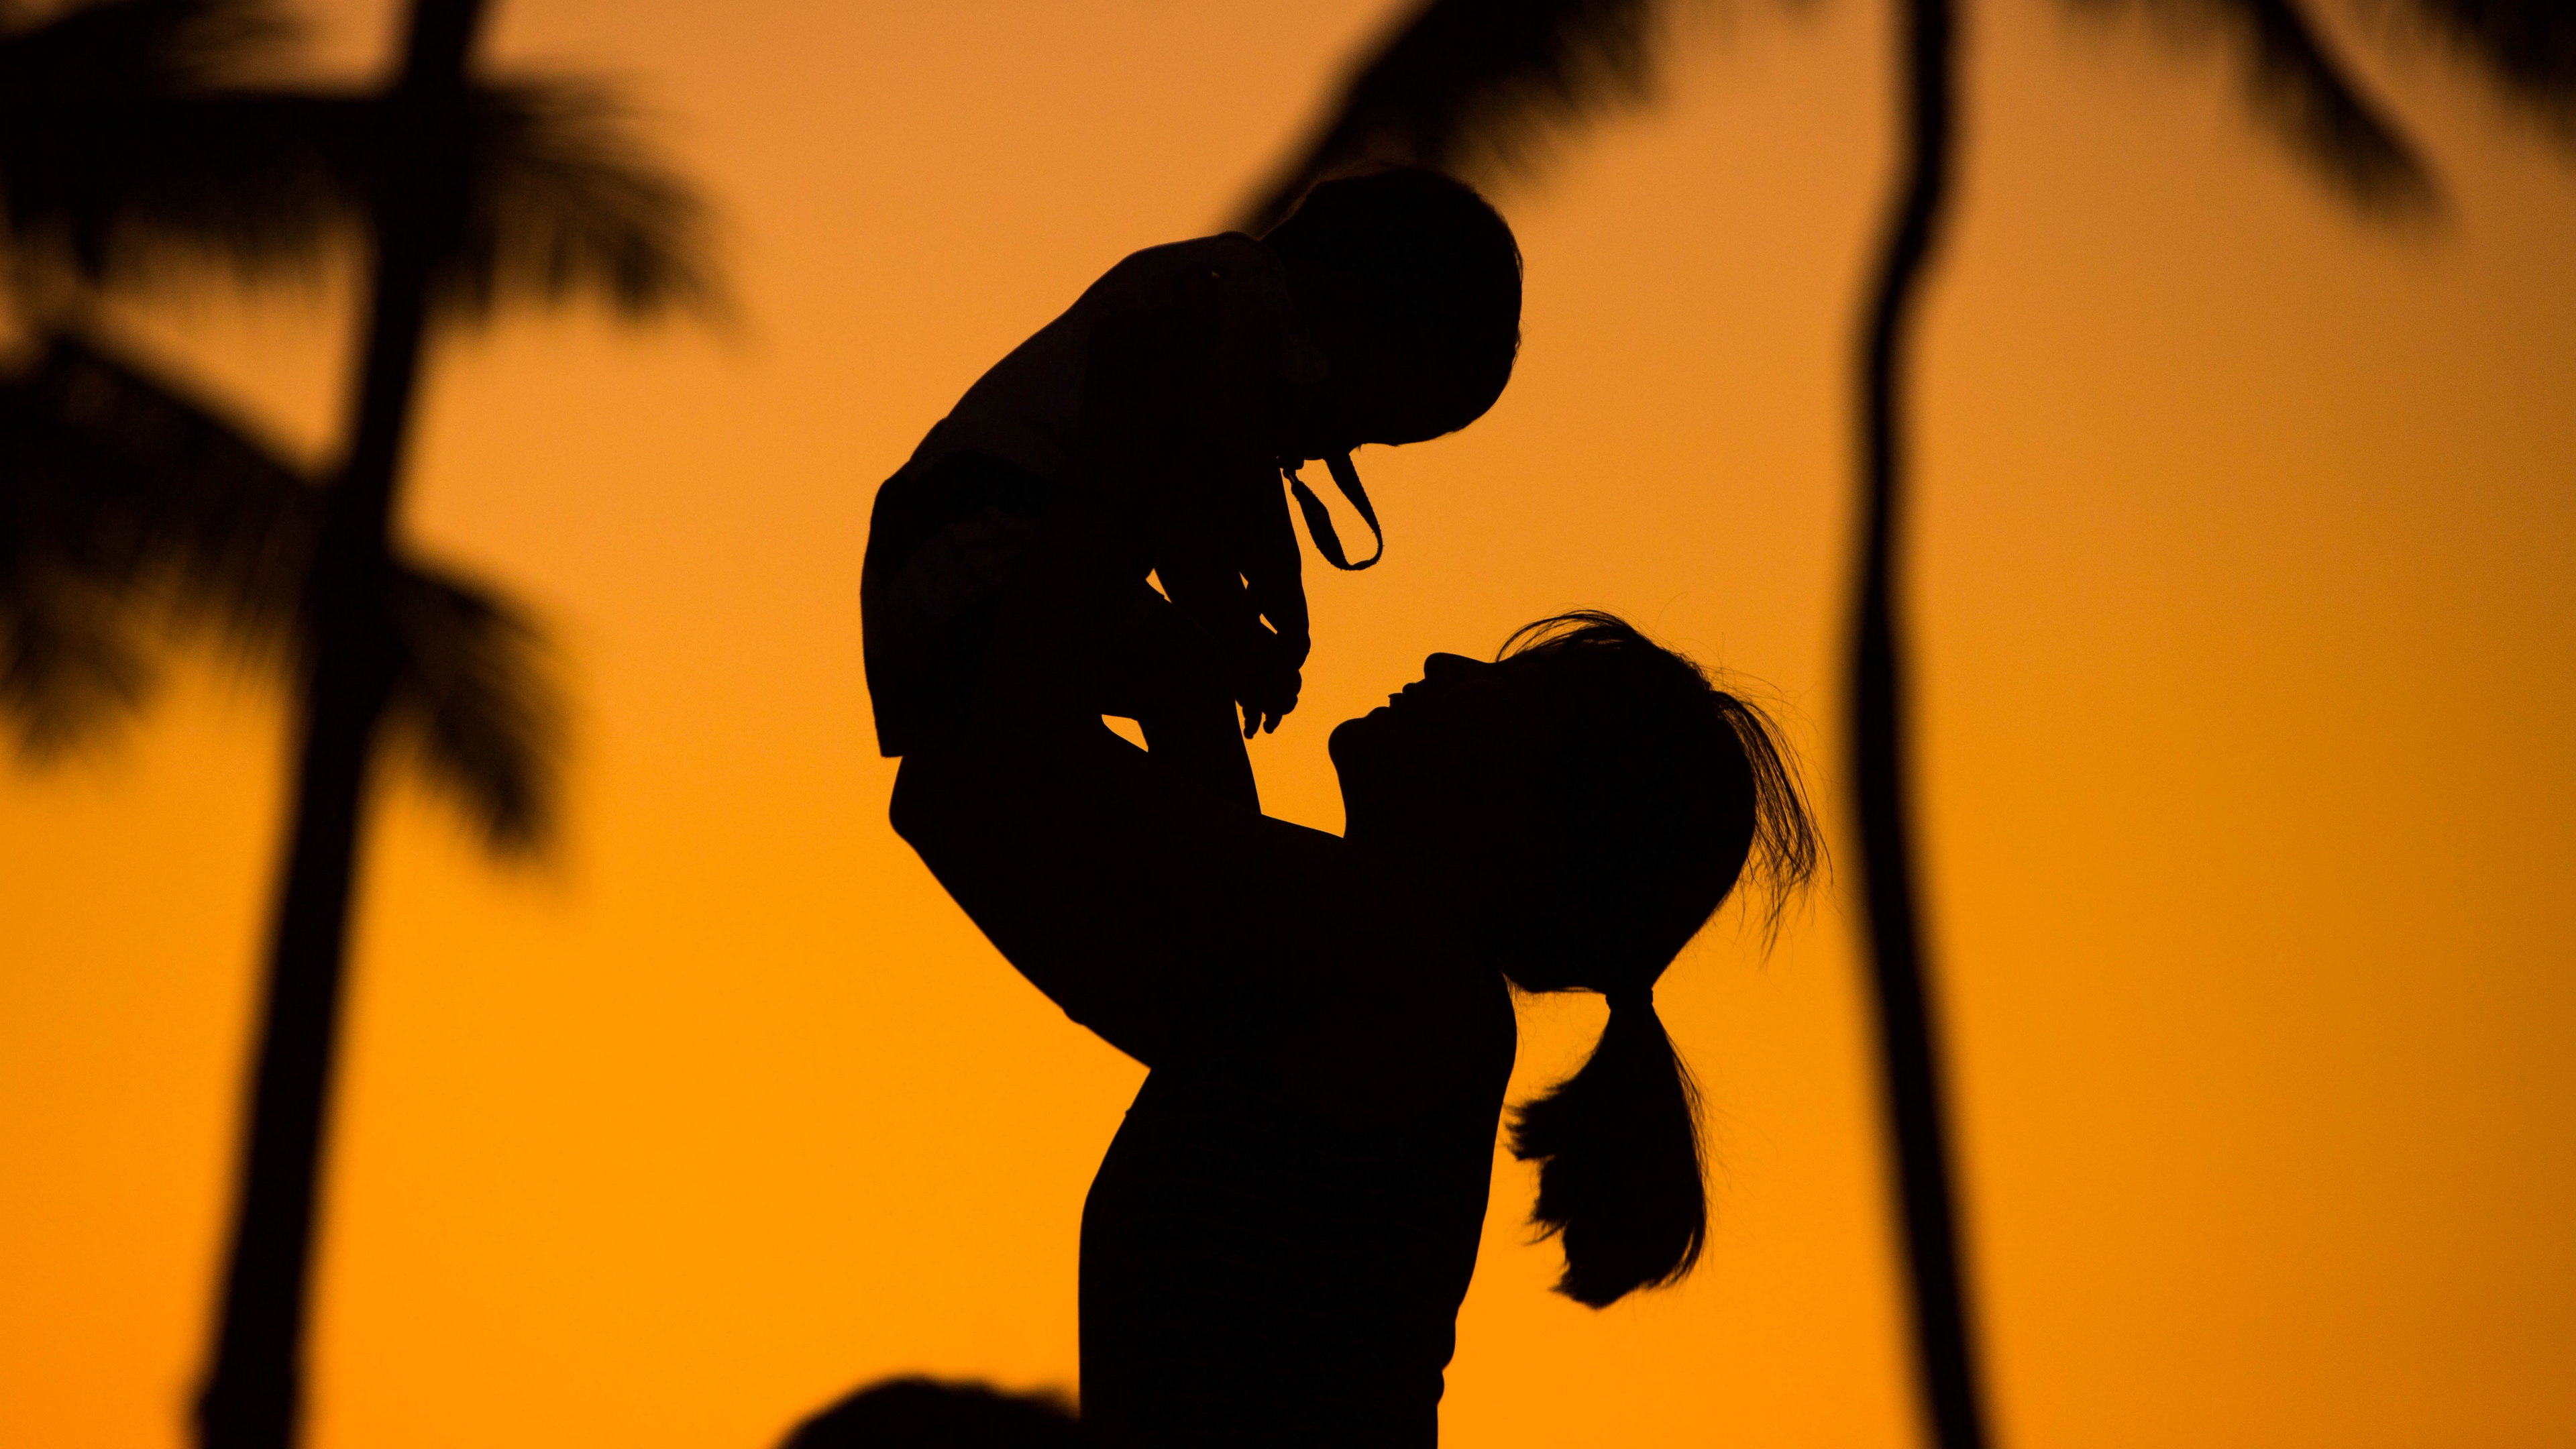 silhouettes mother child sunset 4k 1540576229 - silhouettes, mother, child, sunset 4k - silhouettes, Mother, child